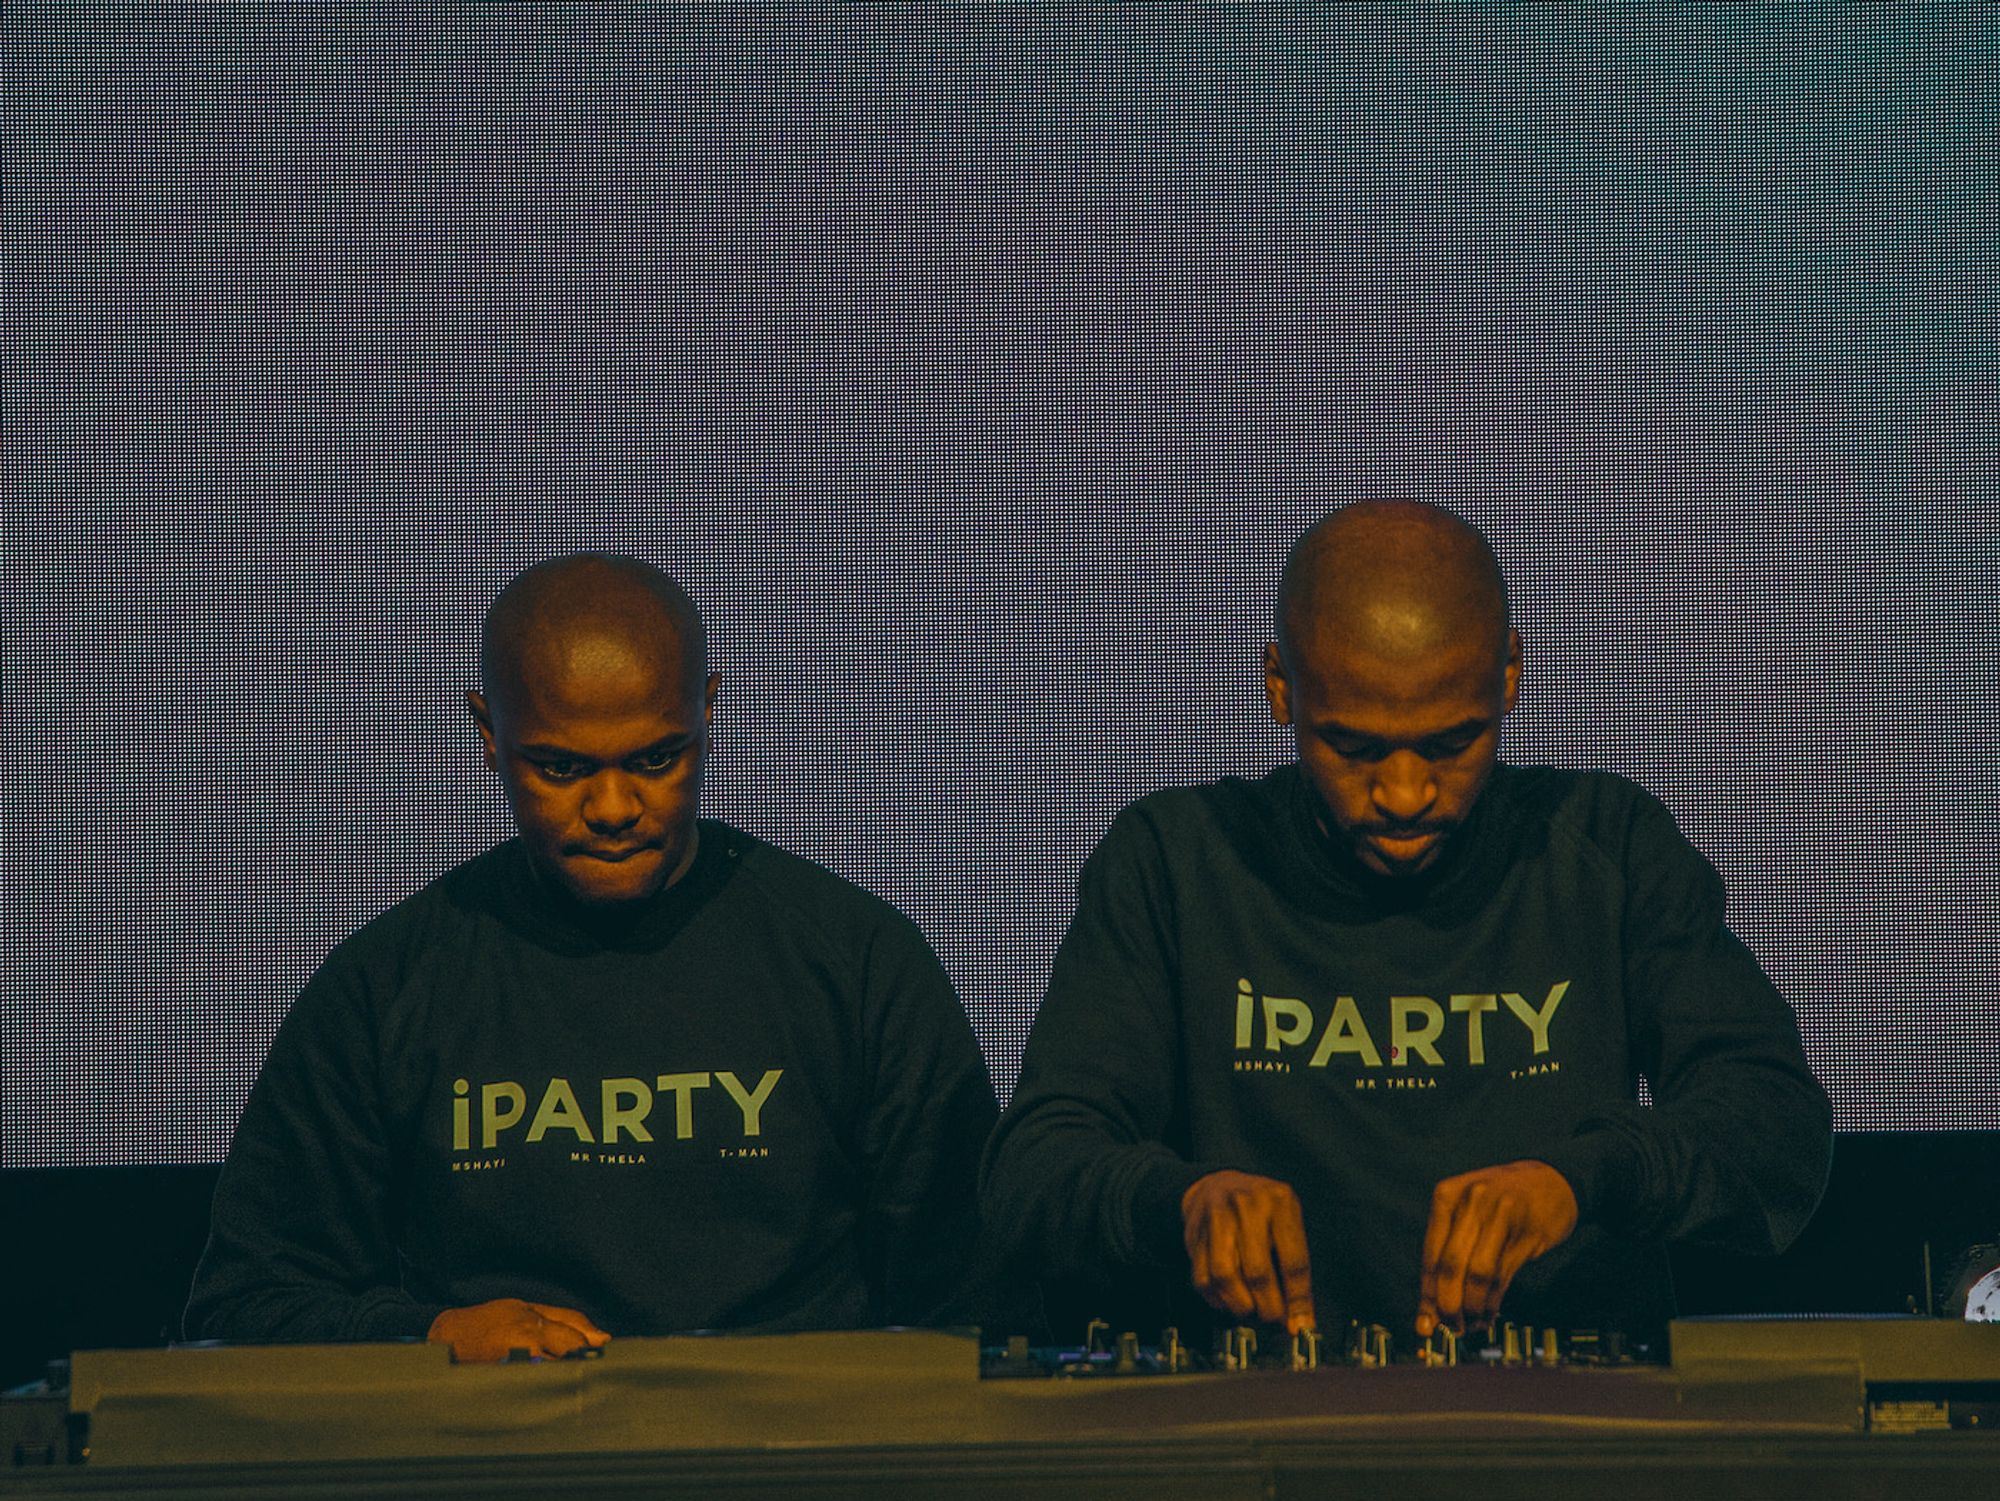 ​Mshayi & Mr Thela on the decks wearing matching sweaters written "IPARTY". 